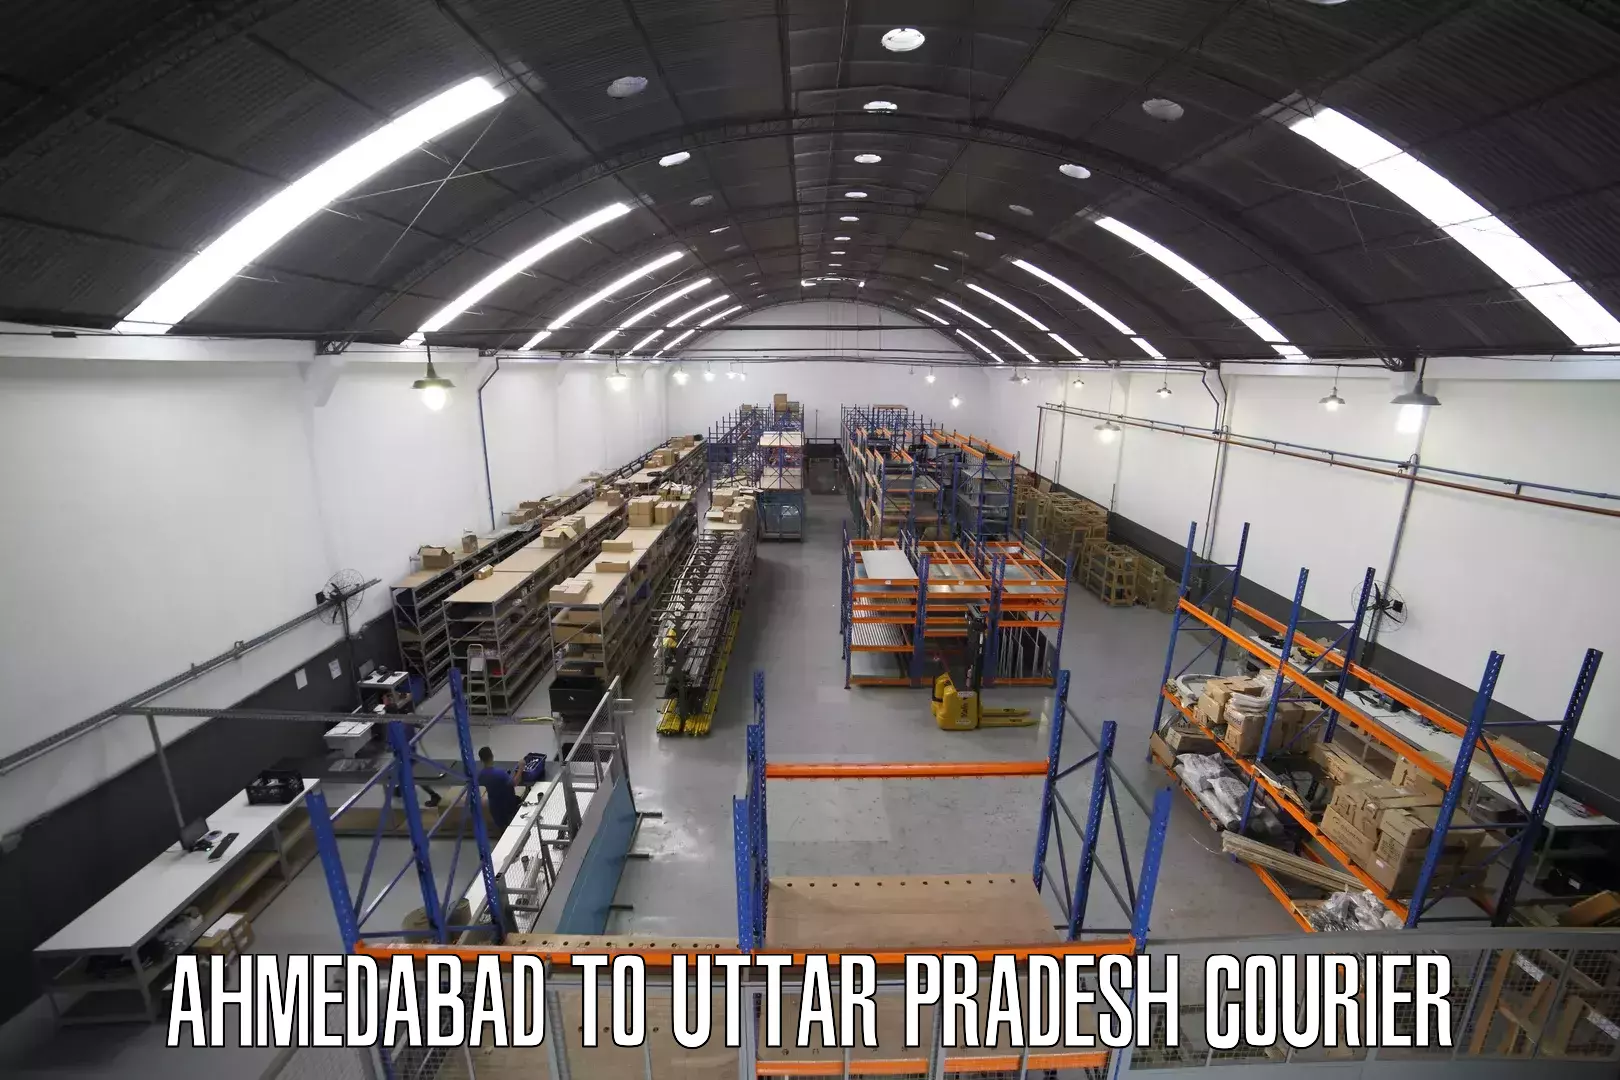 Courier service comparison Ahmedabad to Saidabad